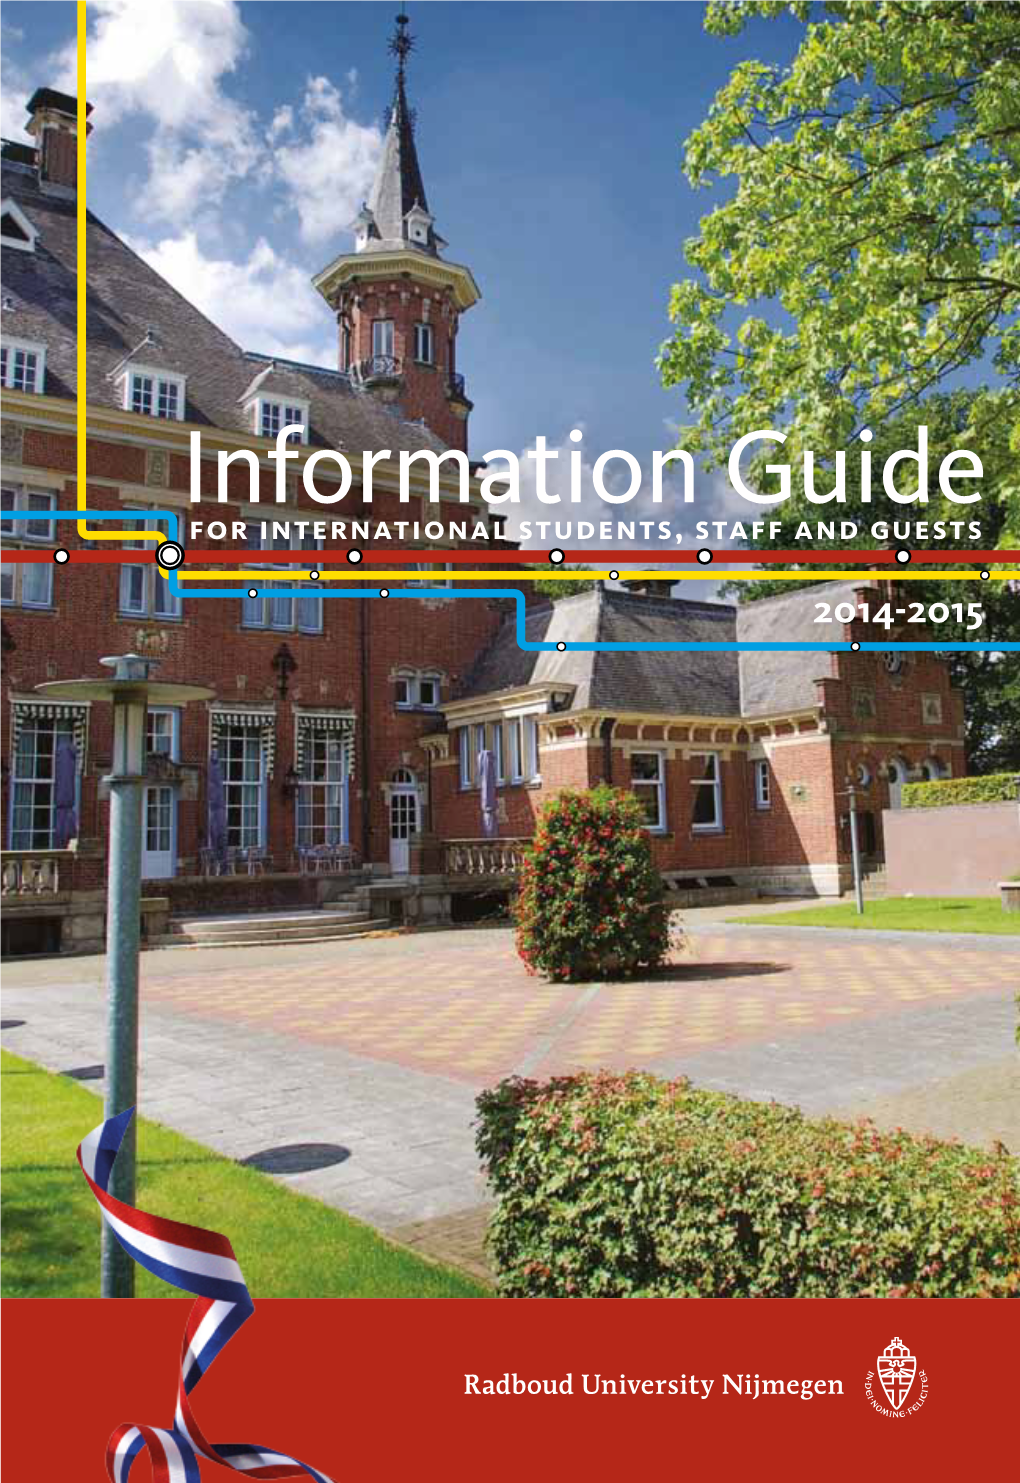 Information Guide for International Students, Staff and Guests